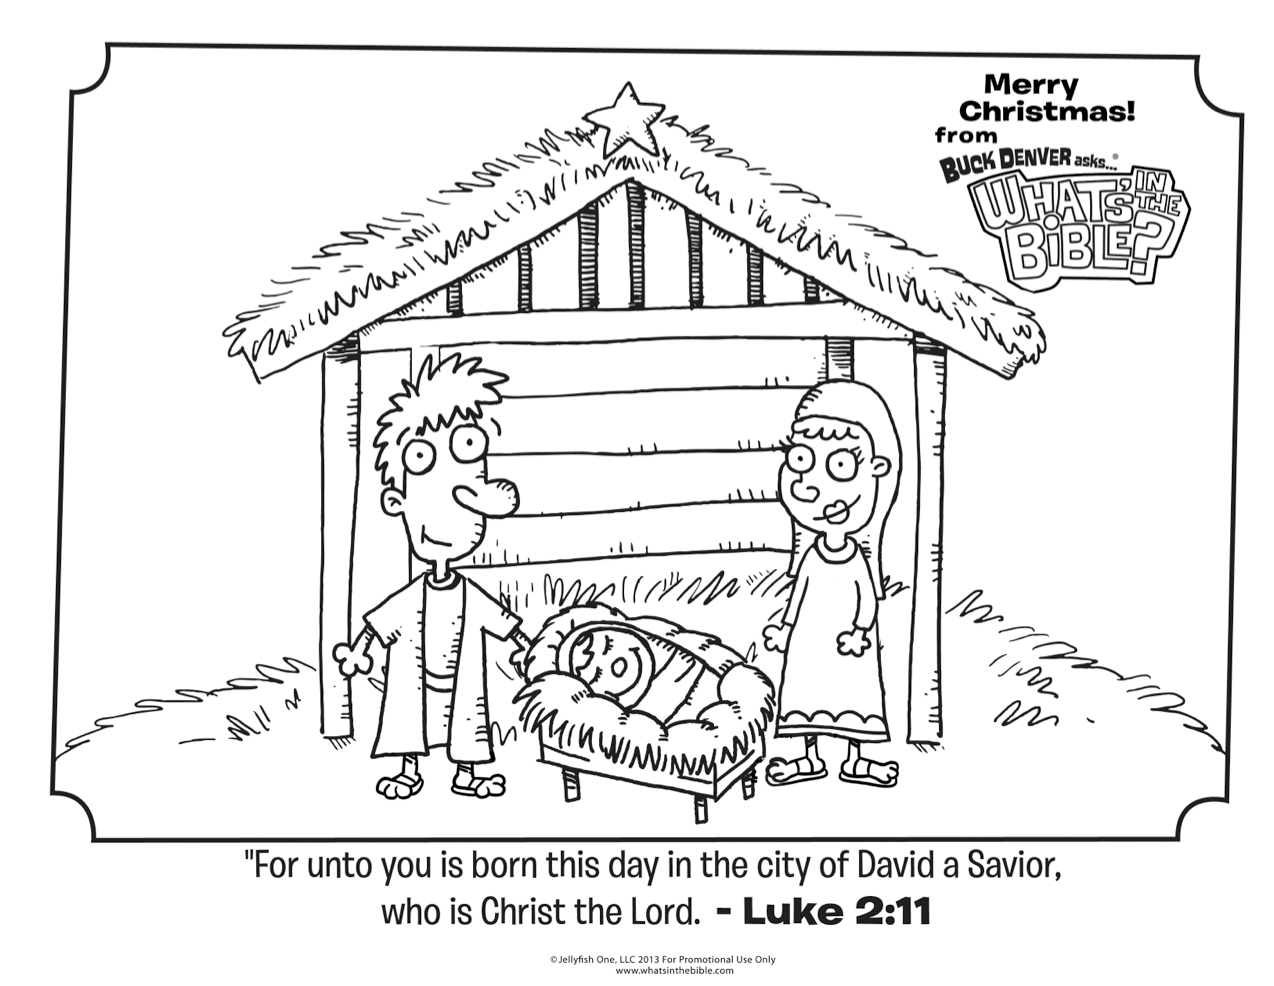 Luke 2:11 Christmas Coloring Page - Whats in the Bible